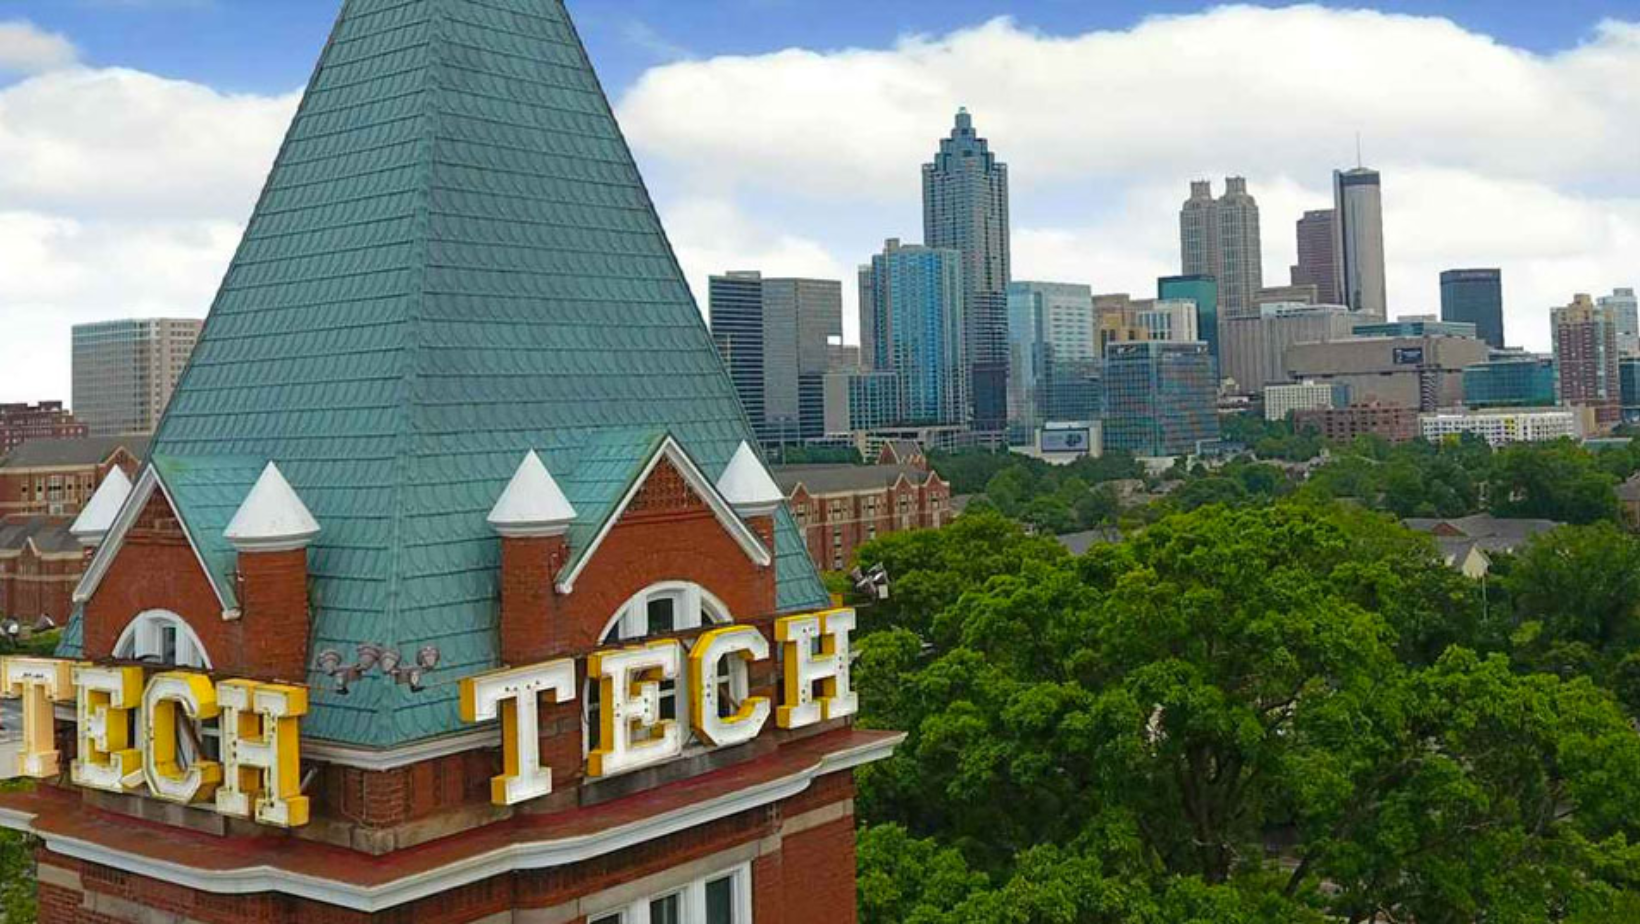 Georgia Tech: A Fast-Paced and Innovative Environment